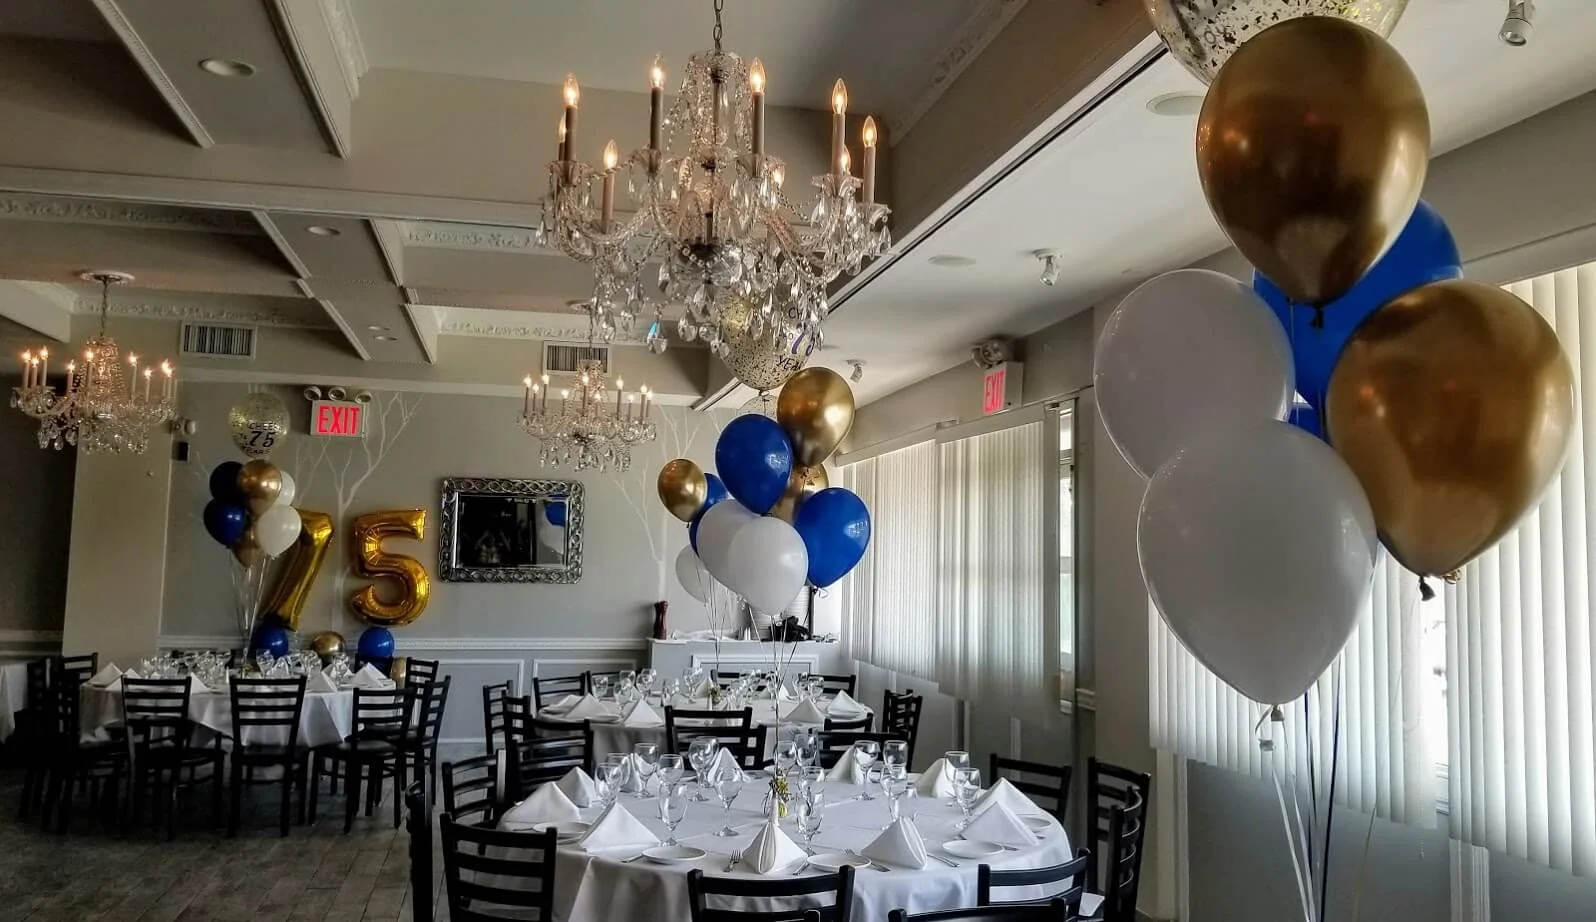 From birthdays to corporate events, Balloons Lane adds an extra touch of elegance and fun to your decor with versatile balloon centerpieces in gold, white and blue.